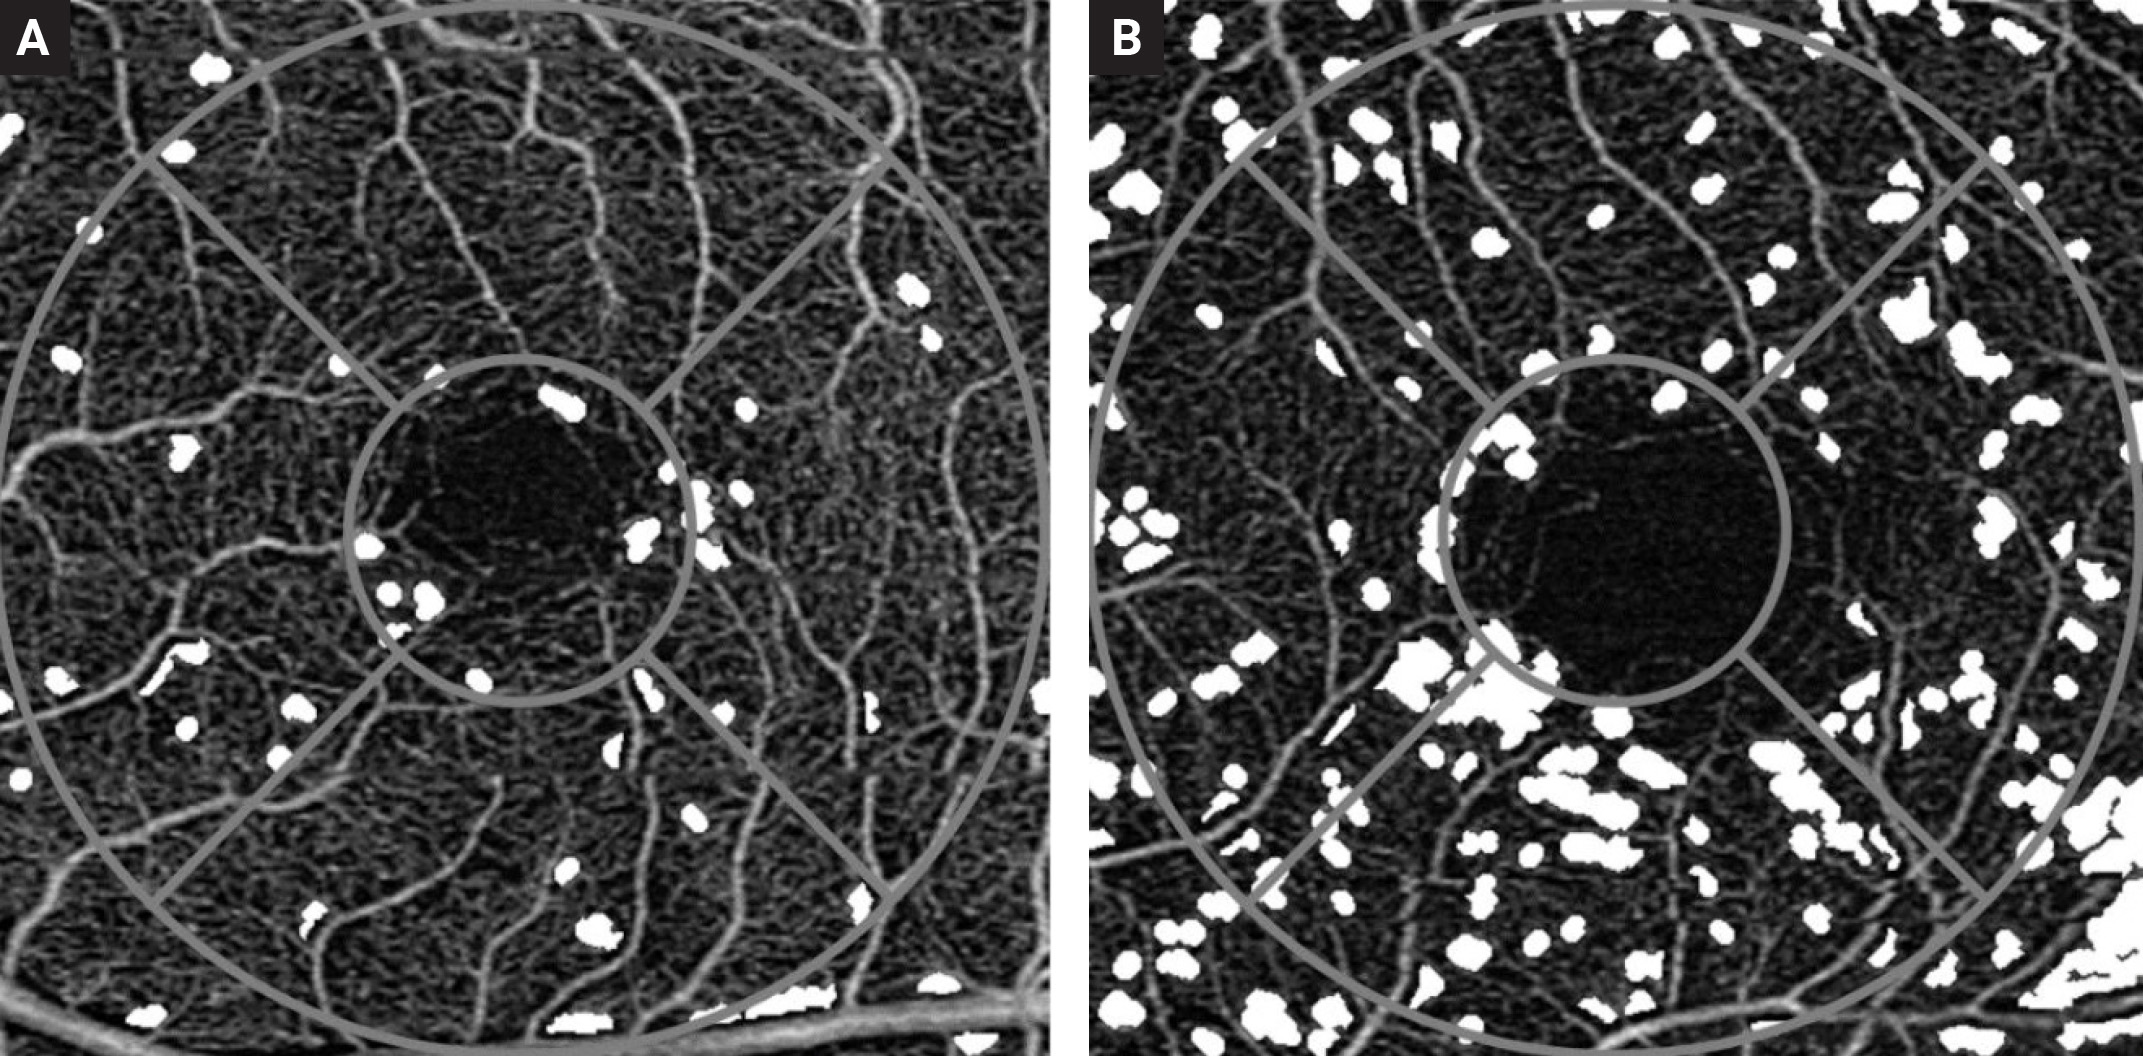 Nonperfused areas in the superficial capillary plexus are seen as white spaces in the intercapillary areas. Figure A is a 70-year-old subject without diabetes for comparison and figure B is the OCT-A scan of a 68-year-old diabetes patient without otherwise visible retinal lesions on fundus photography.